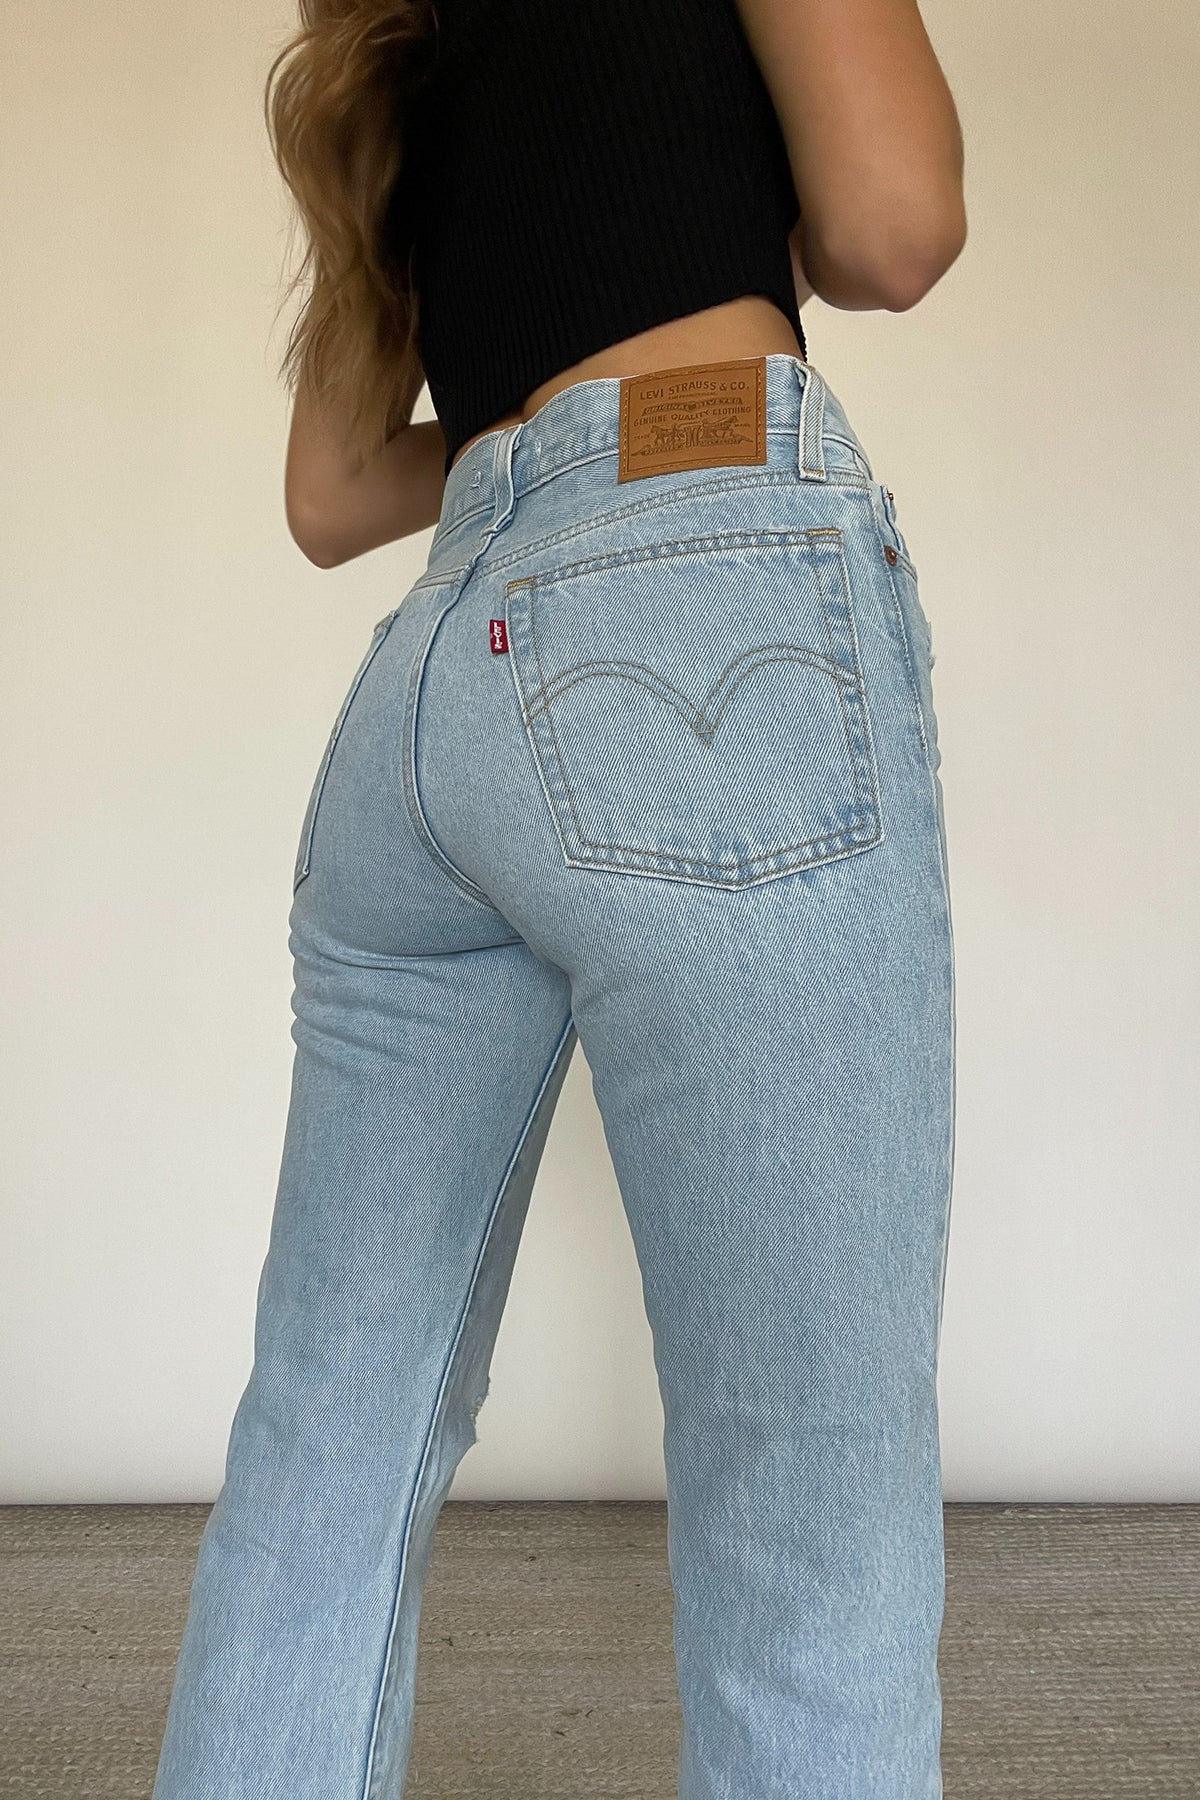 Levi's Wedgie Straight Jeans in Luxor Again – americanthreads